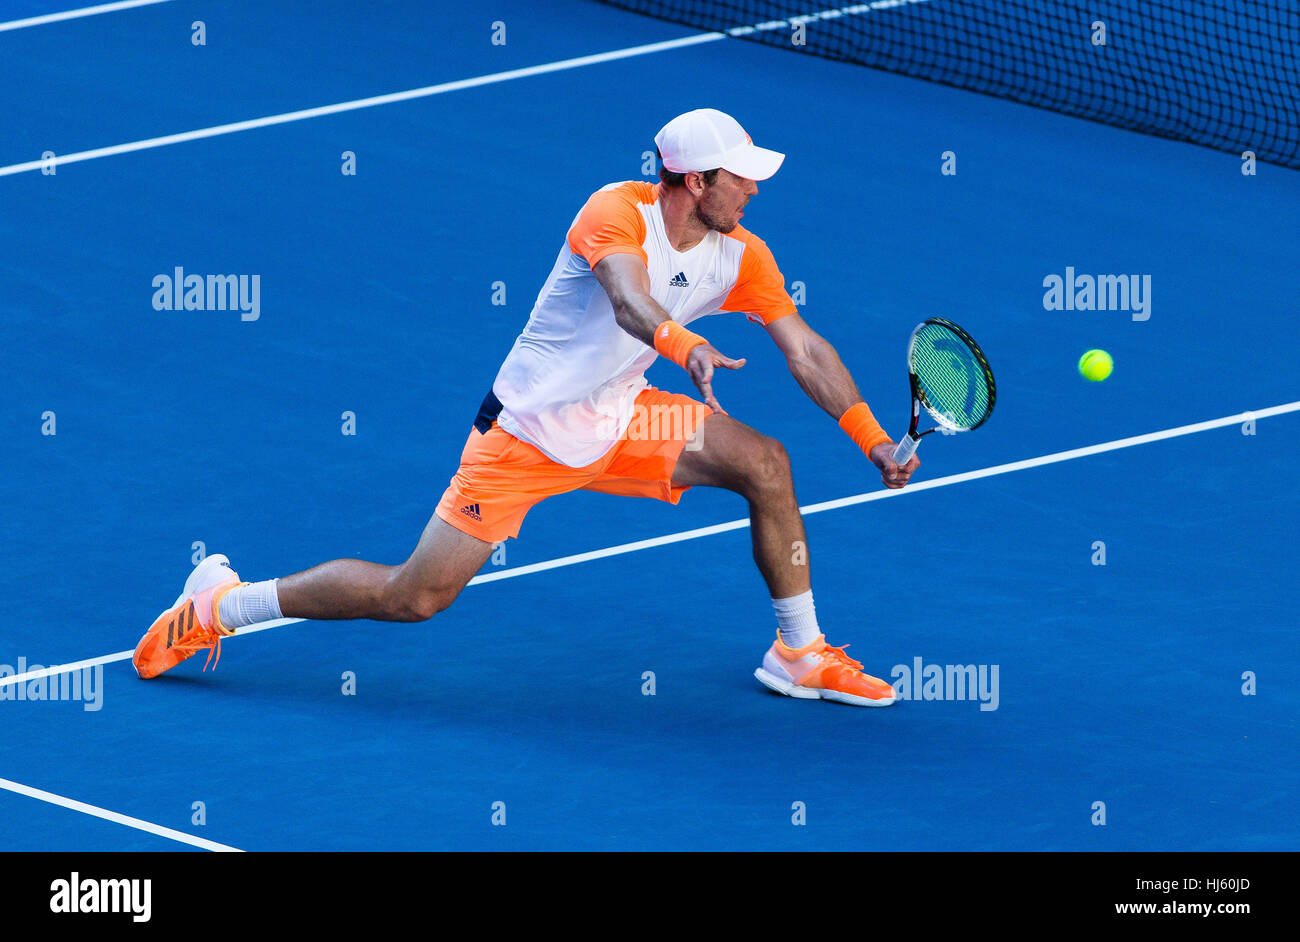 Mischa Zverev of Germany ousts world number one Andy Murray during the 2017 Tennis Australian Open at Melbourne Park Stock Photo